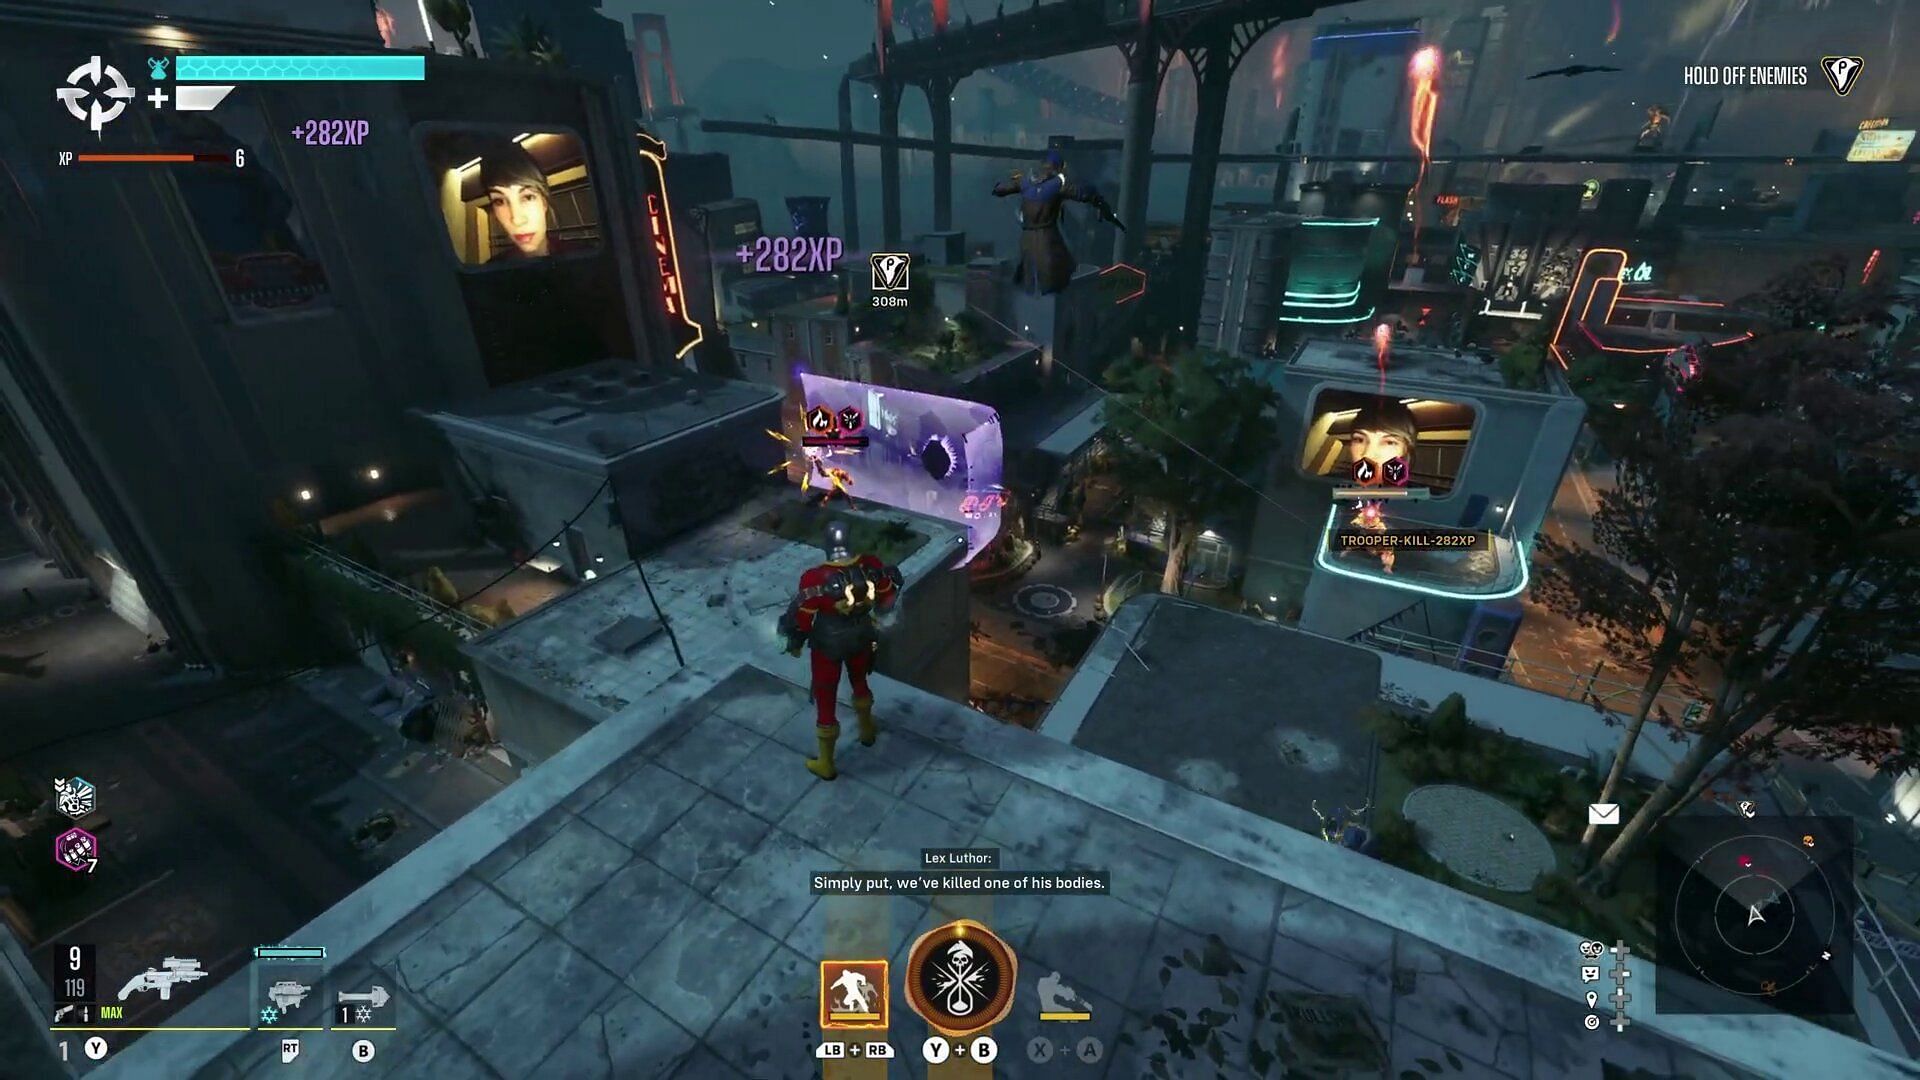 World events offer the chance to get better loot and unlock talent trees. (Image via YouTube/MrRoflWaffles)